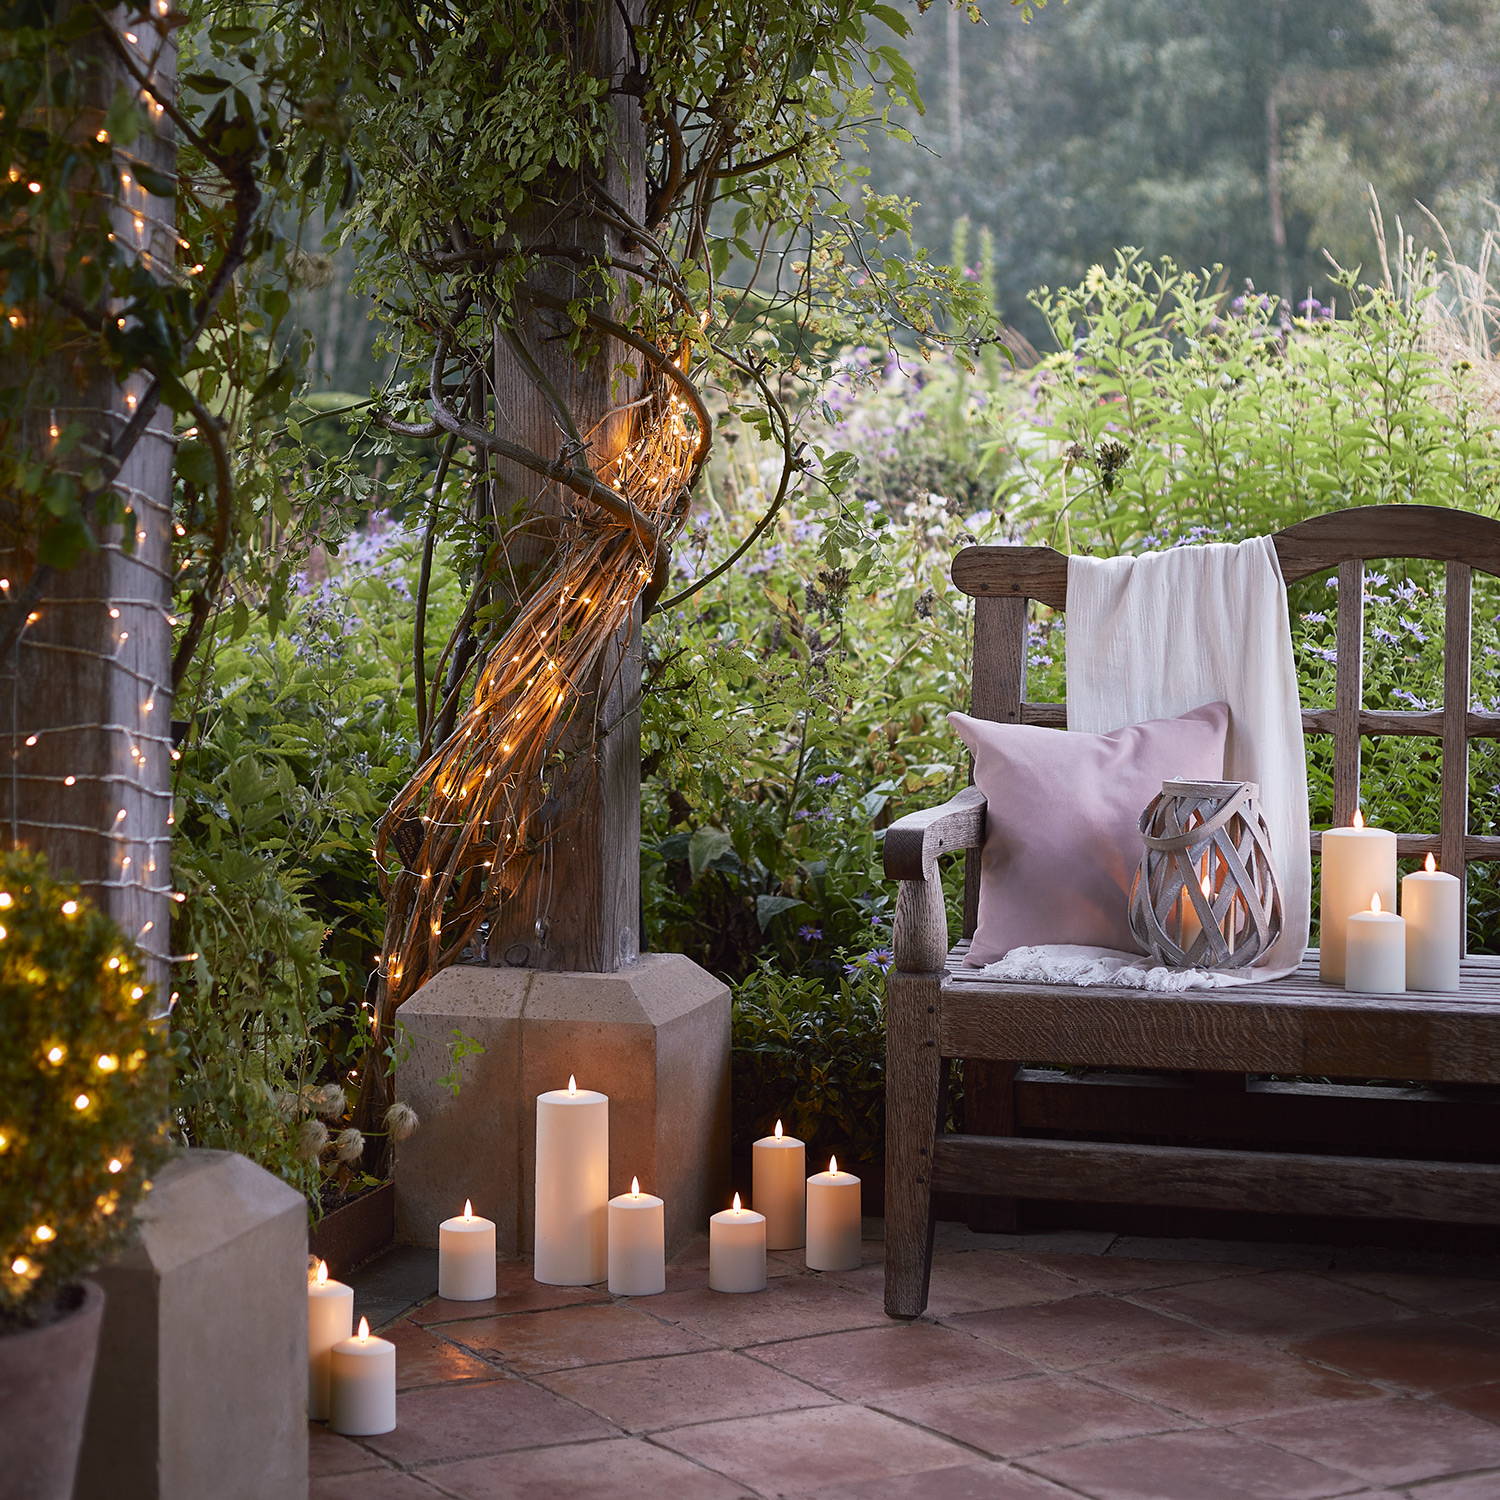 A country style courtyard with lots of glowing LED candles and fairy lights